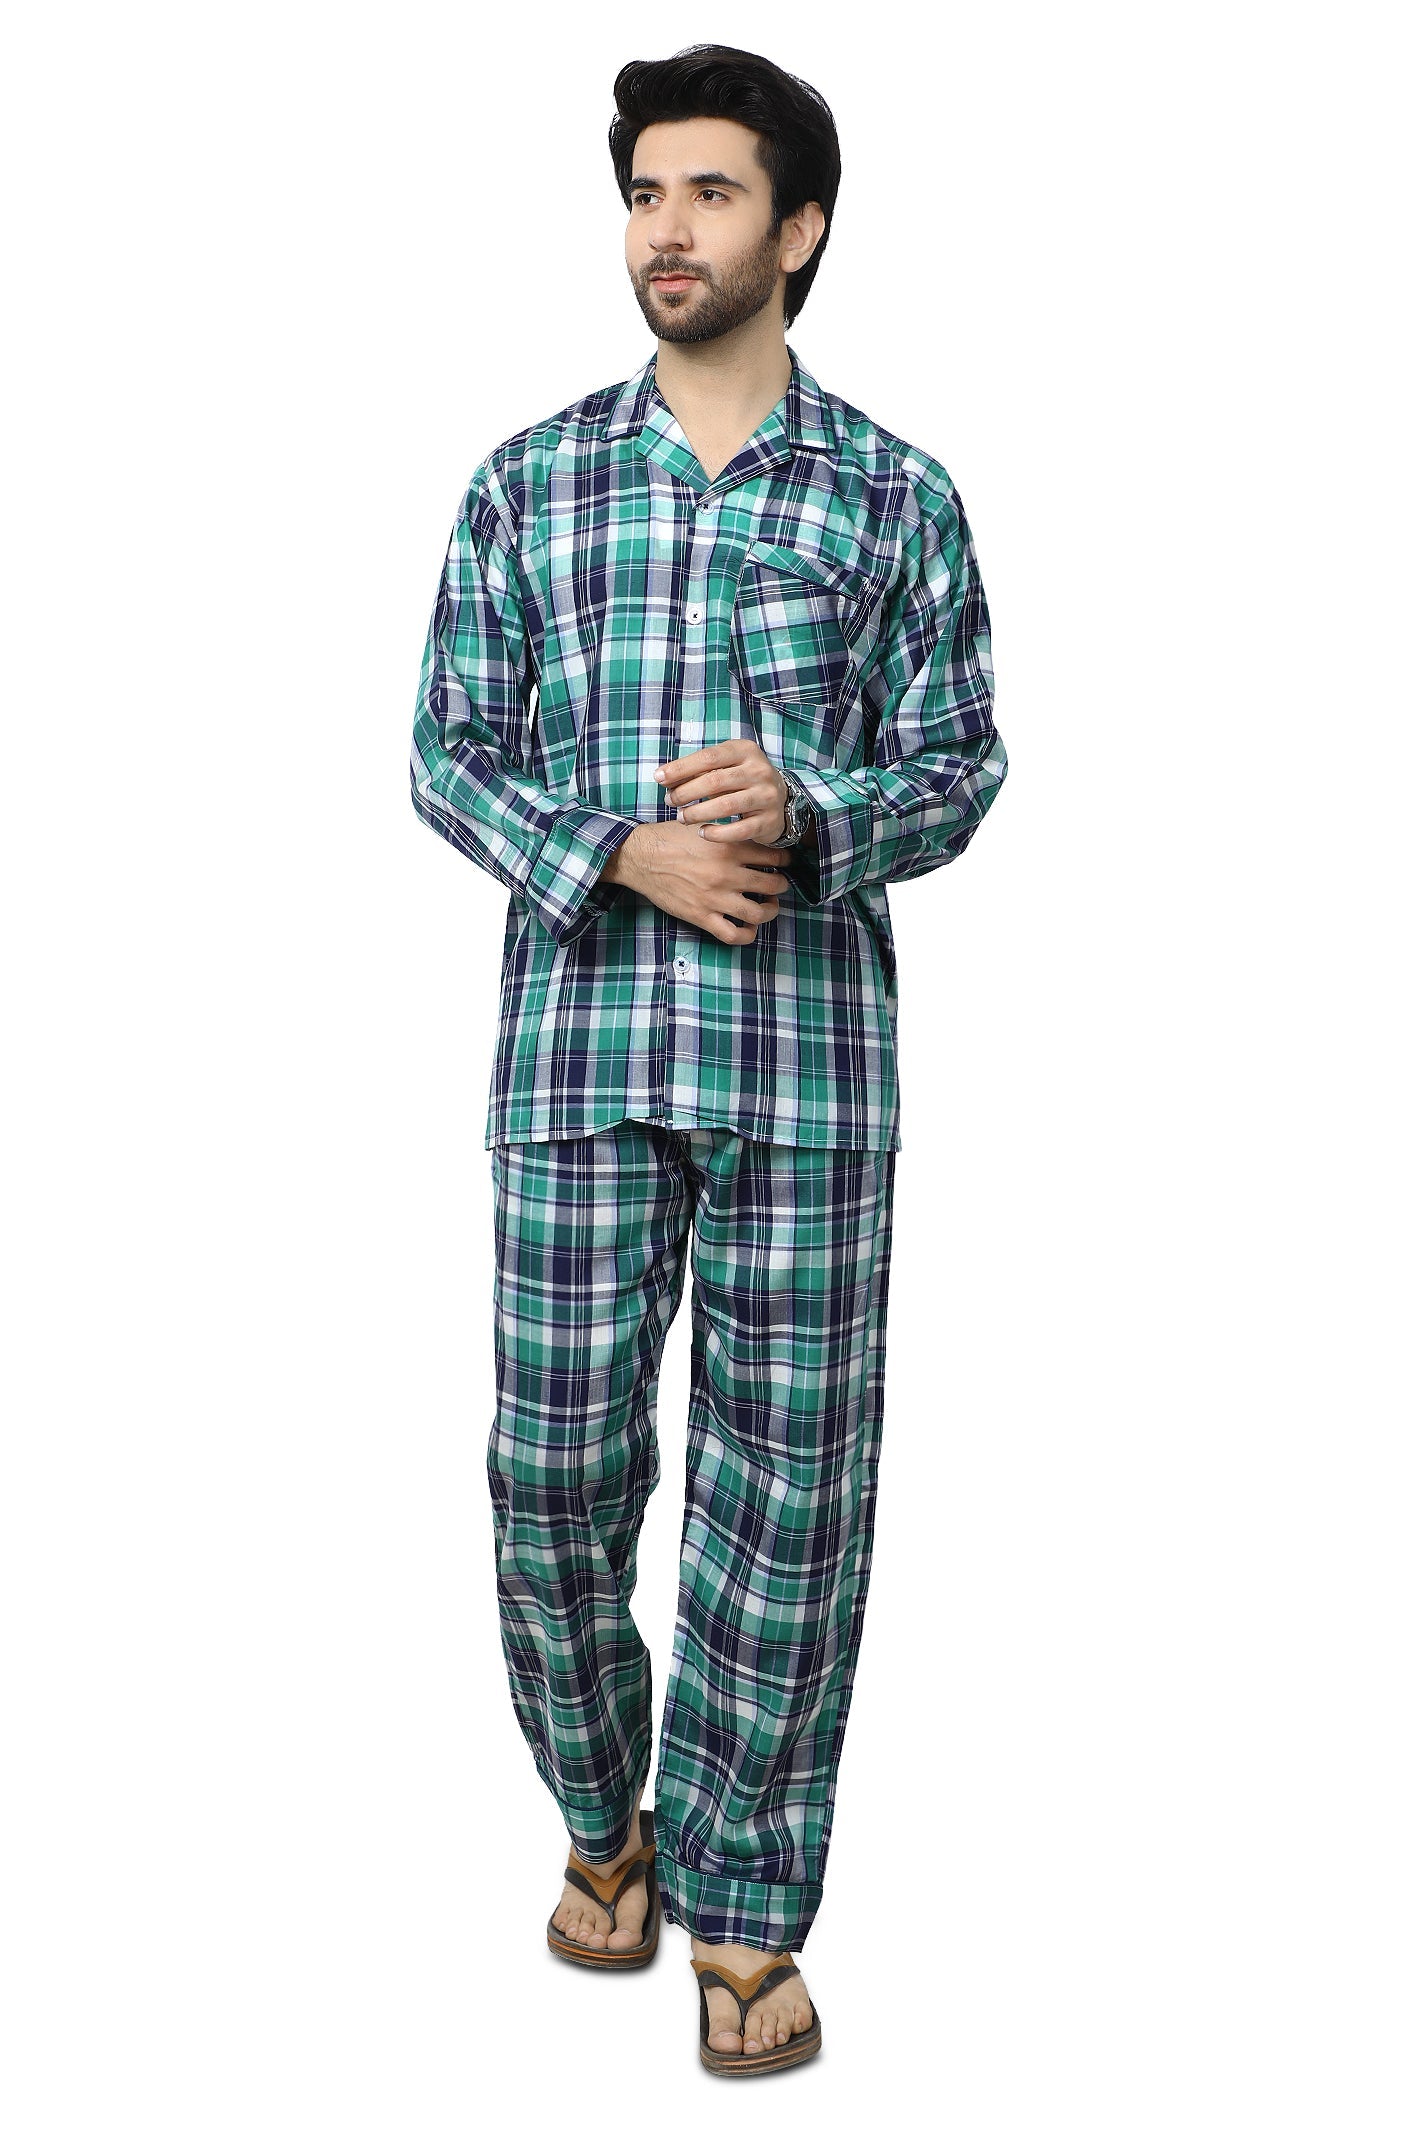 Diner's Night Suit for Men SKU: FNS015-GREEN - Diners